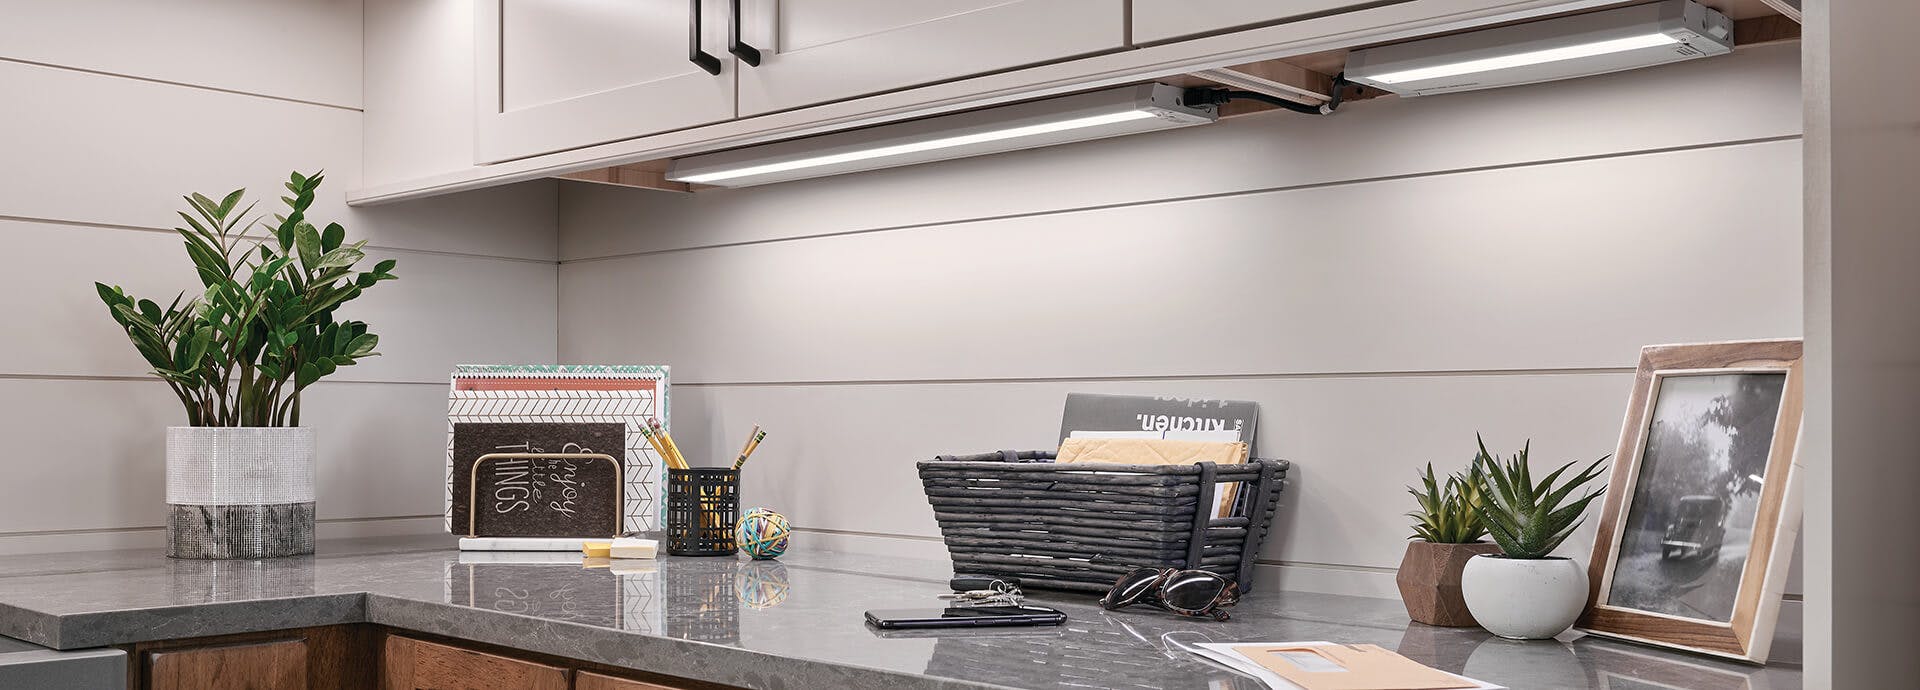 Cabinets with lighting underneath above a grey counter with various decorative items.